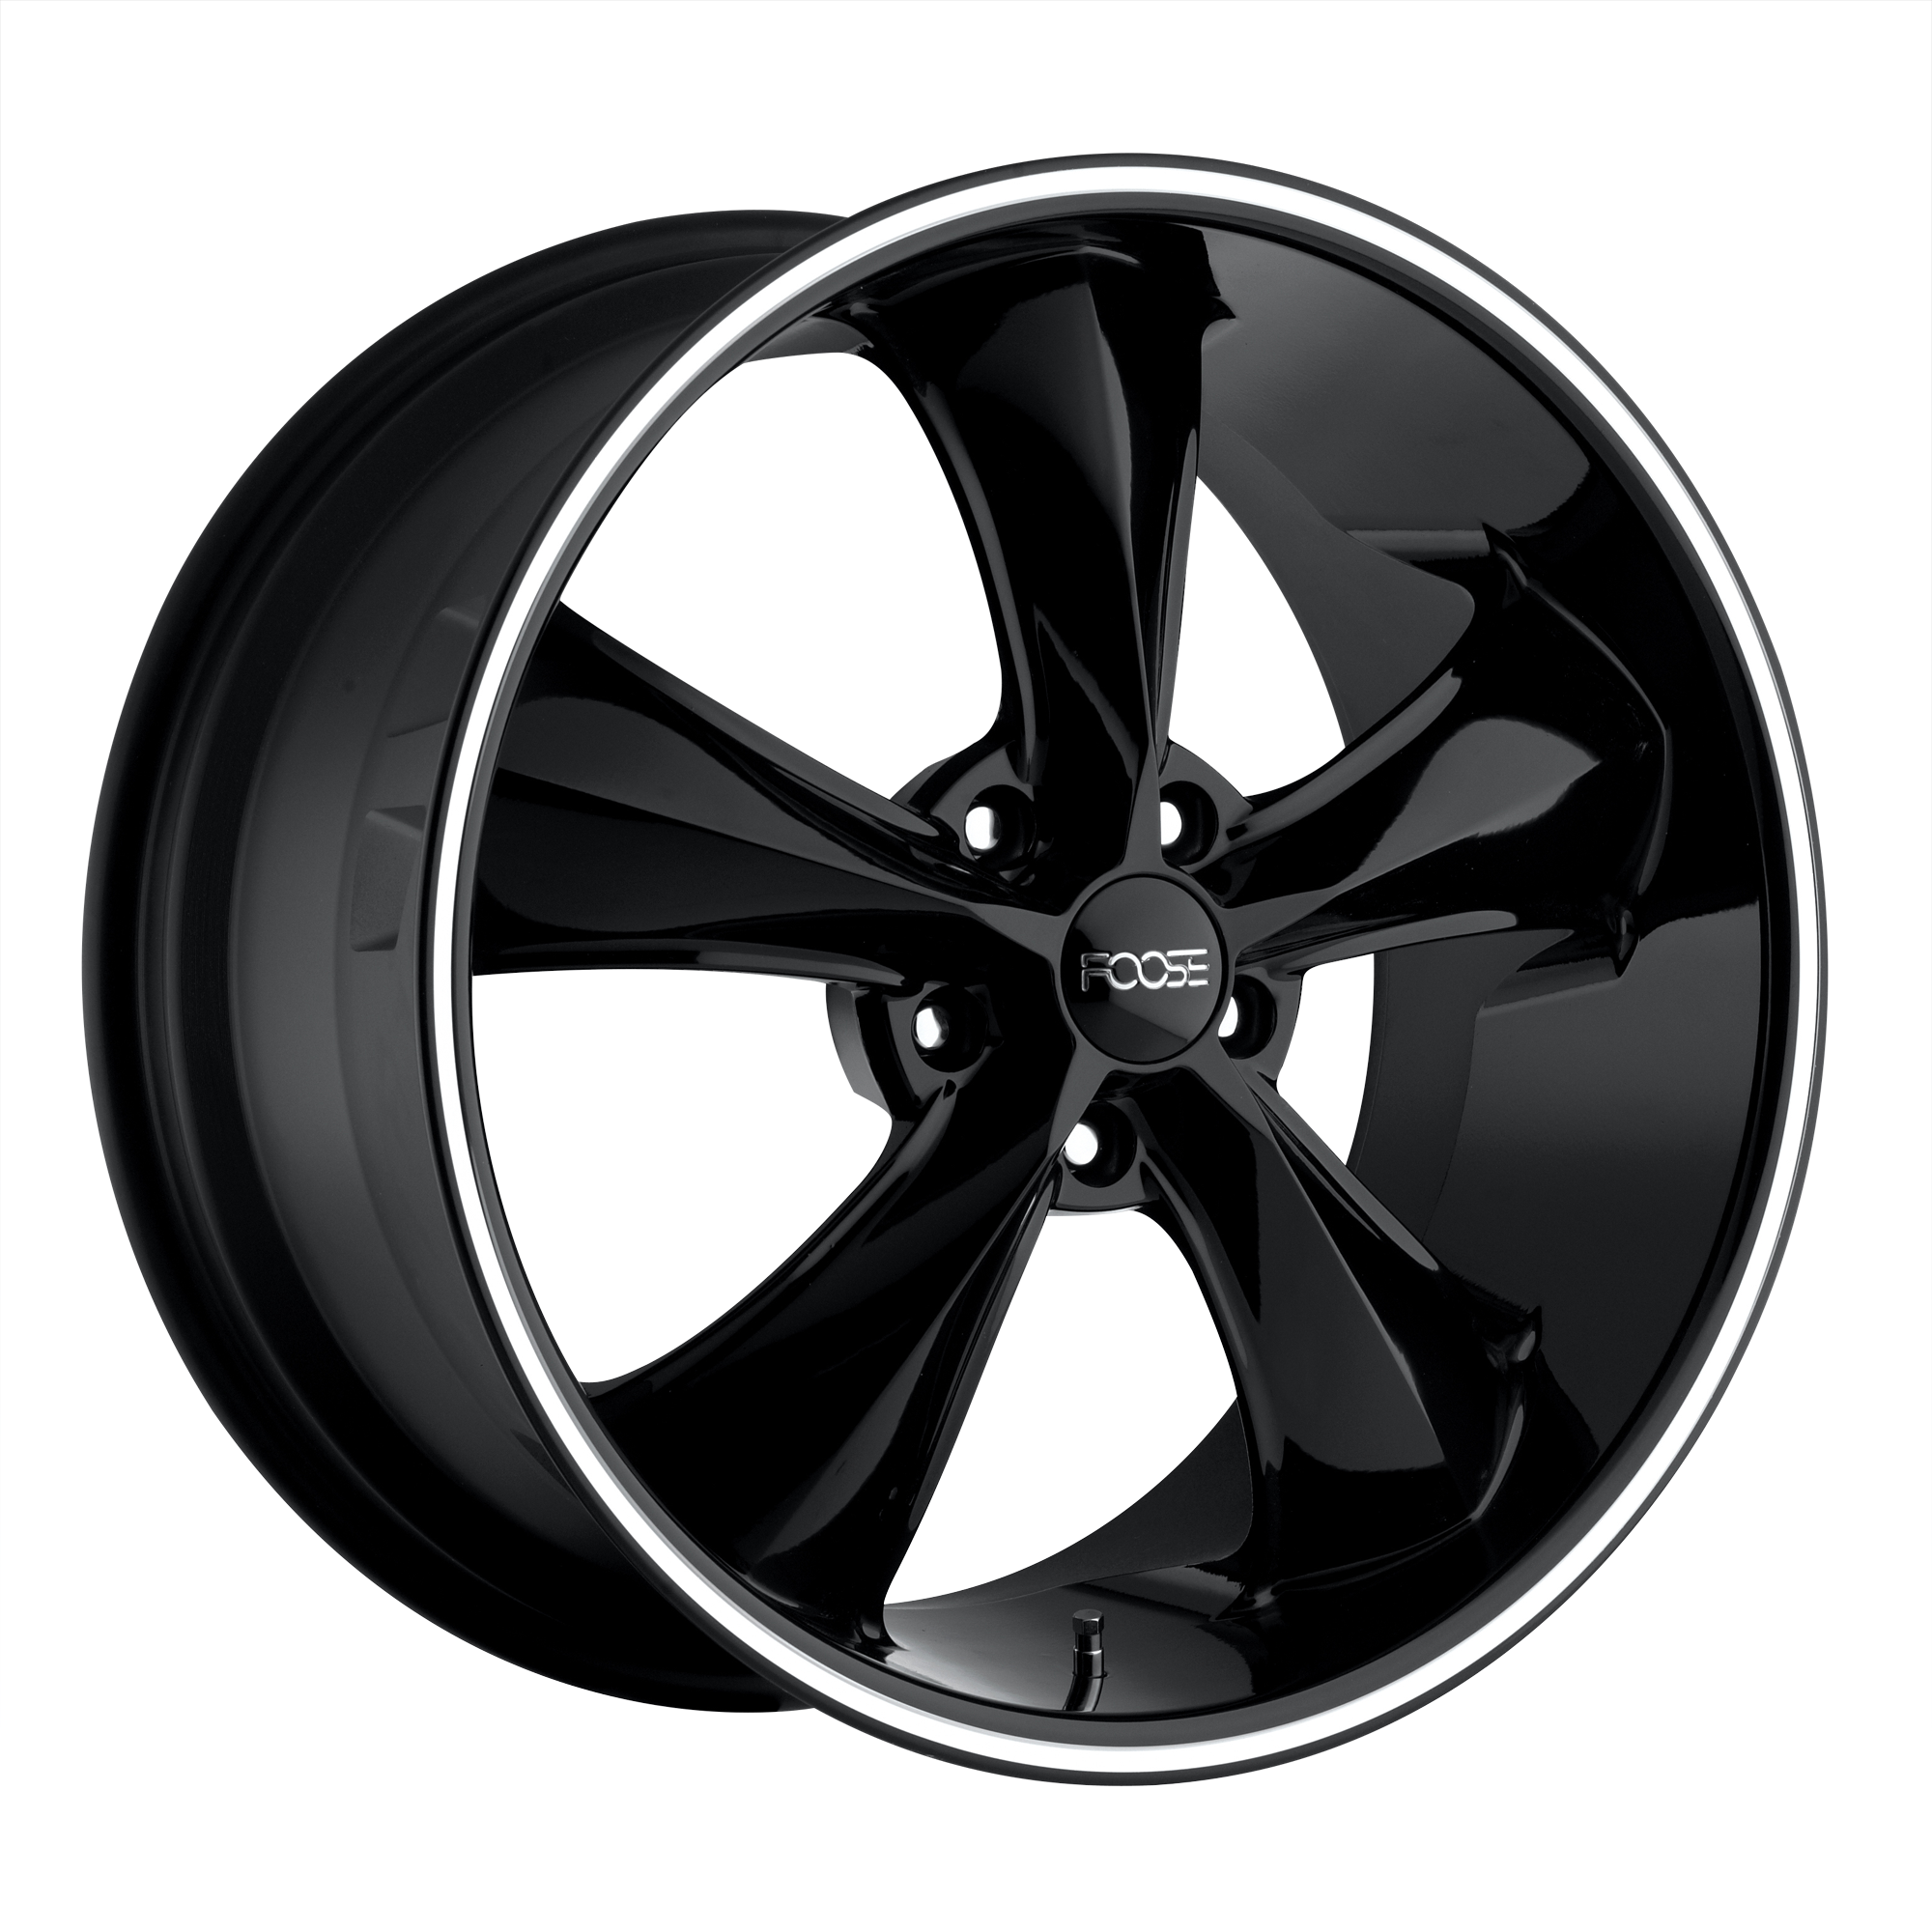 LEGEND 18x8 5x114.30 GLOSS BLACK MILLED (1 mm) - Tires and Engine Performance